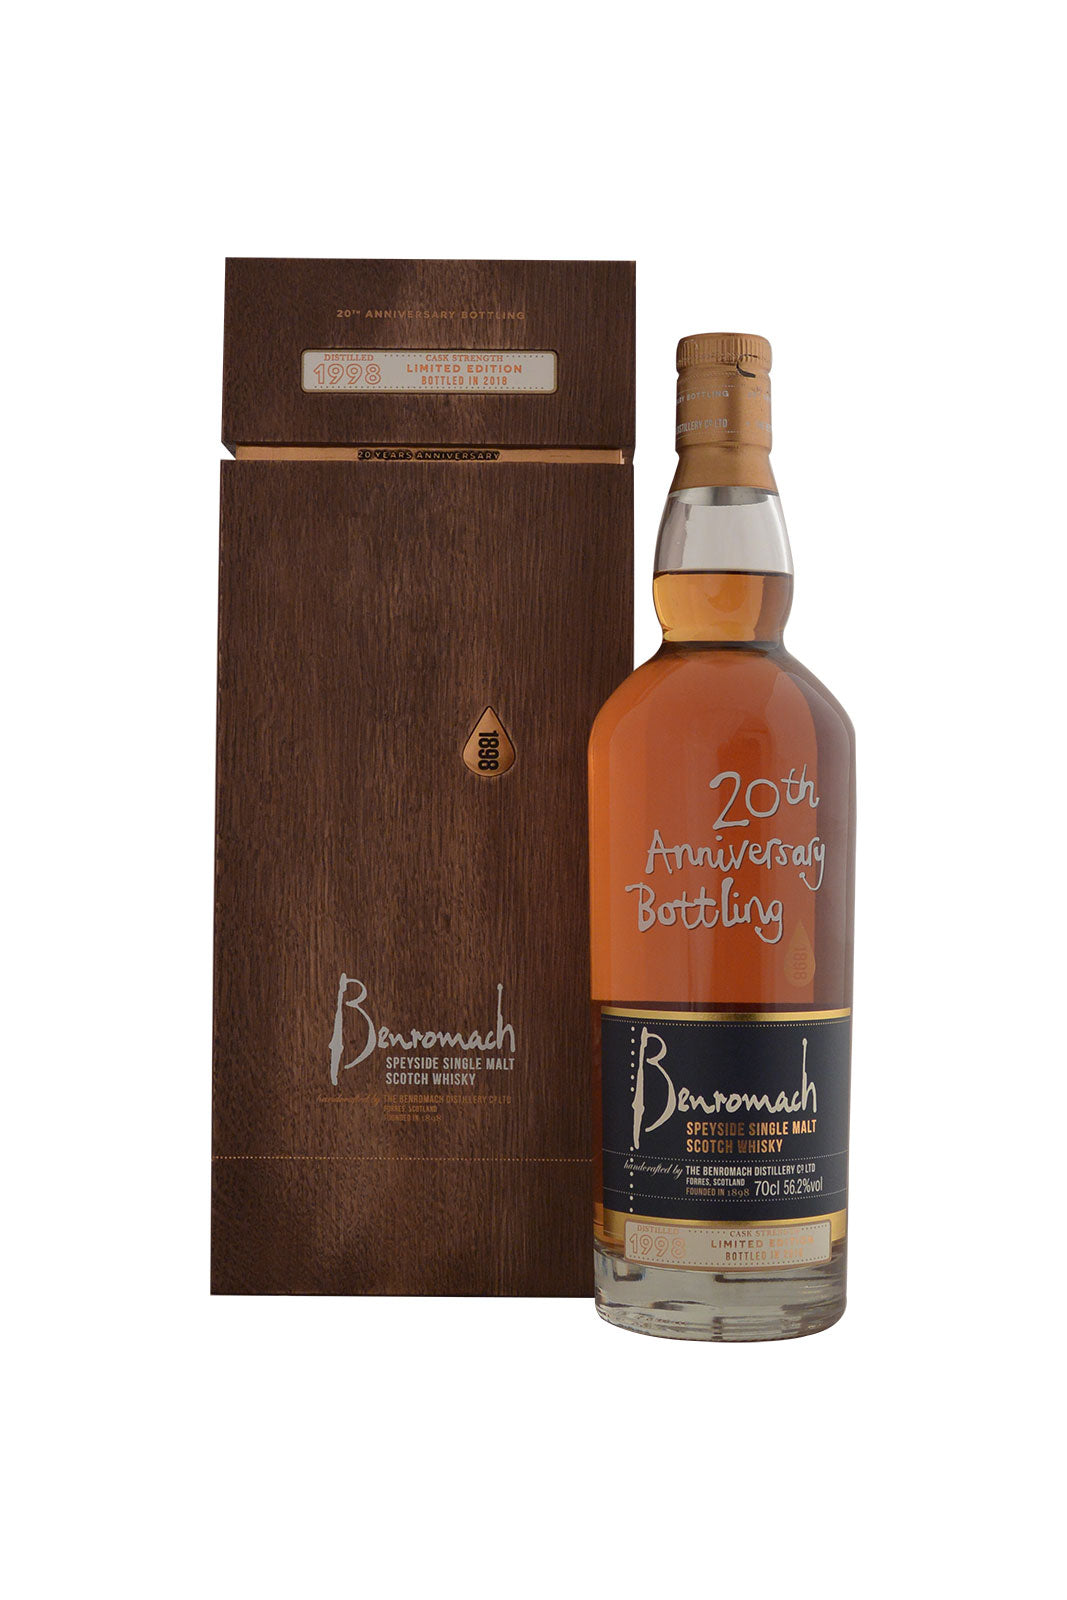 Benromach 20 Year Old  (20th Anniversary Bottling)